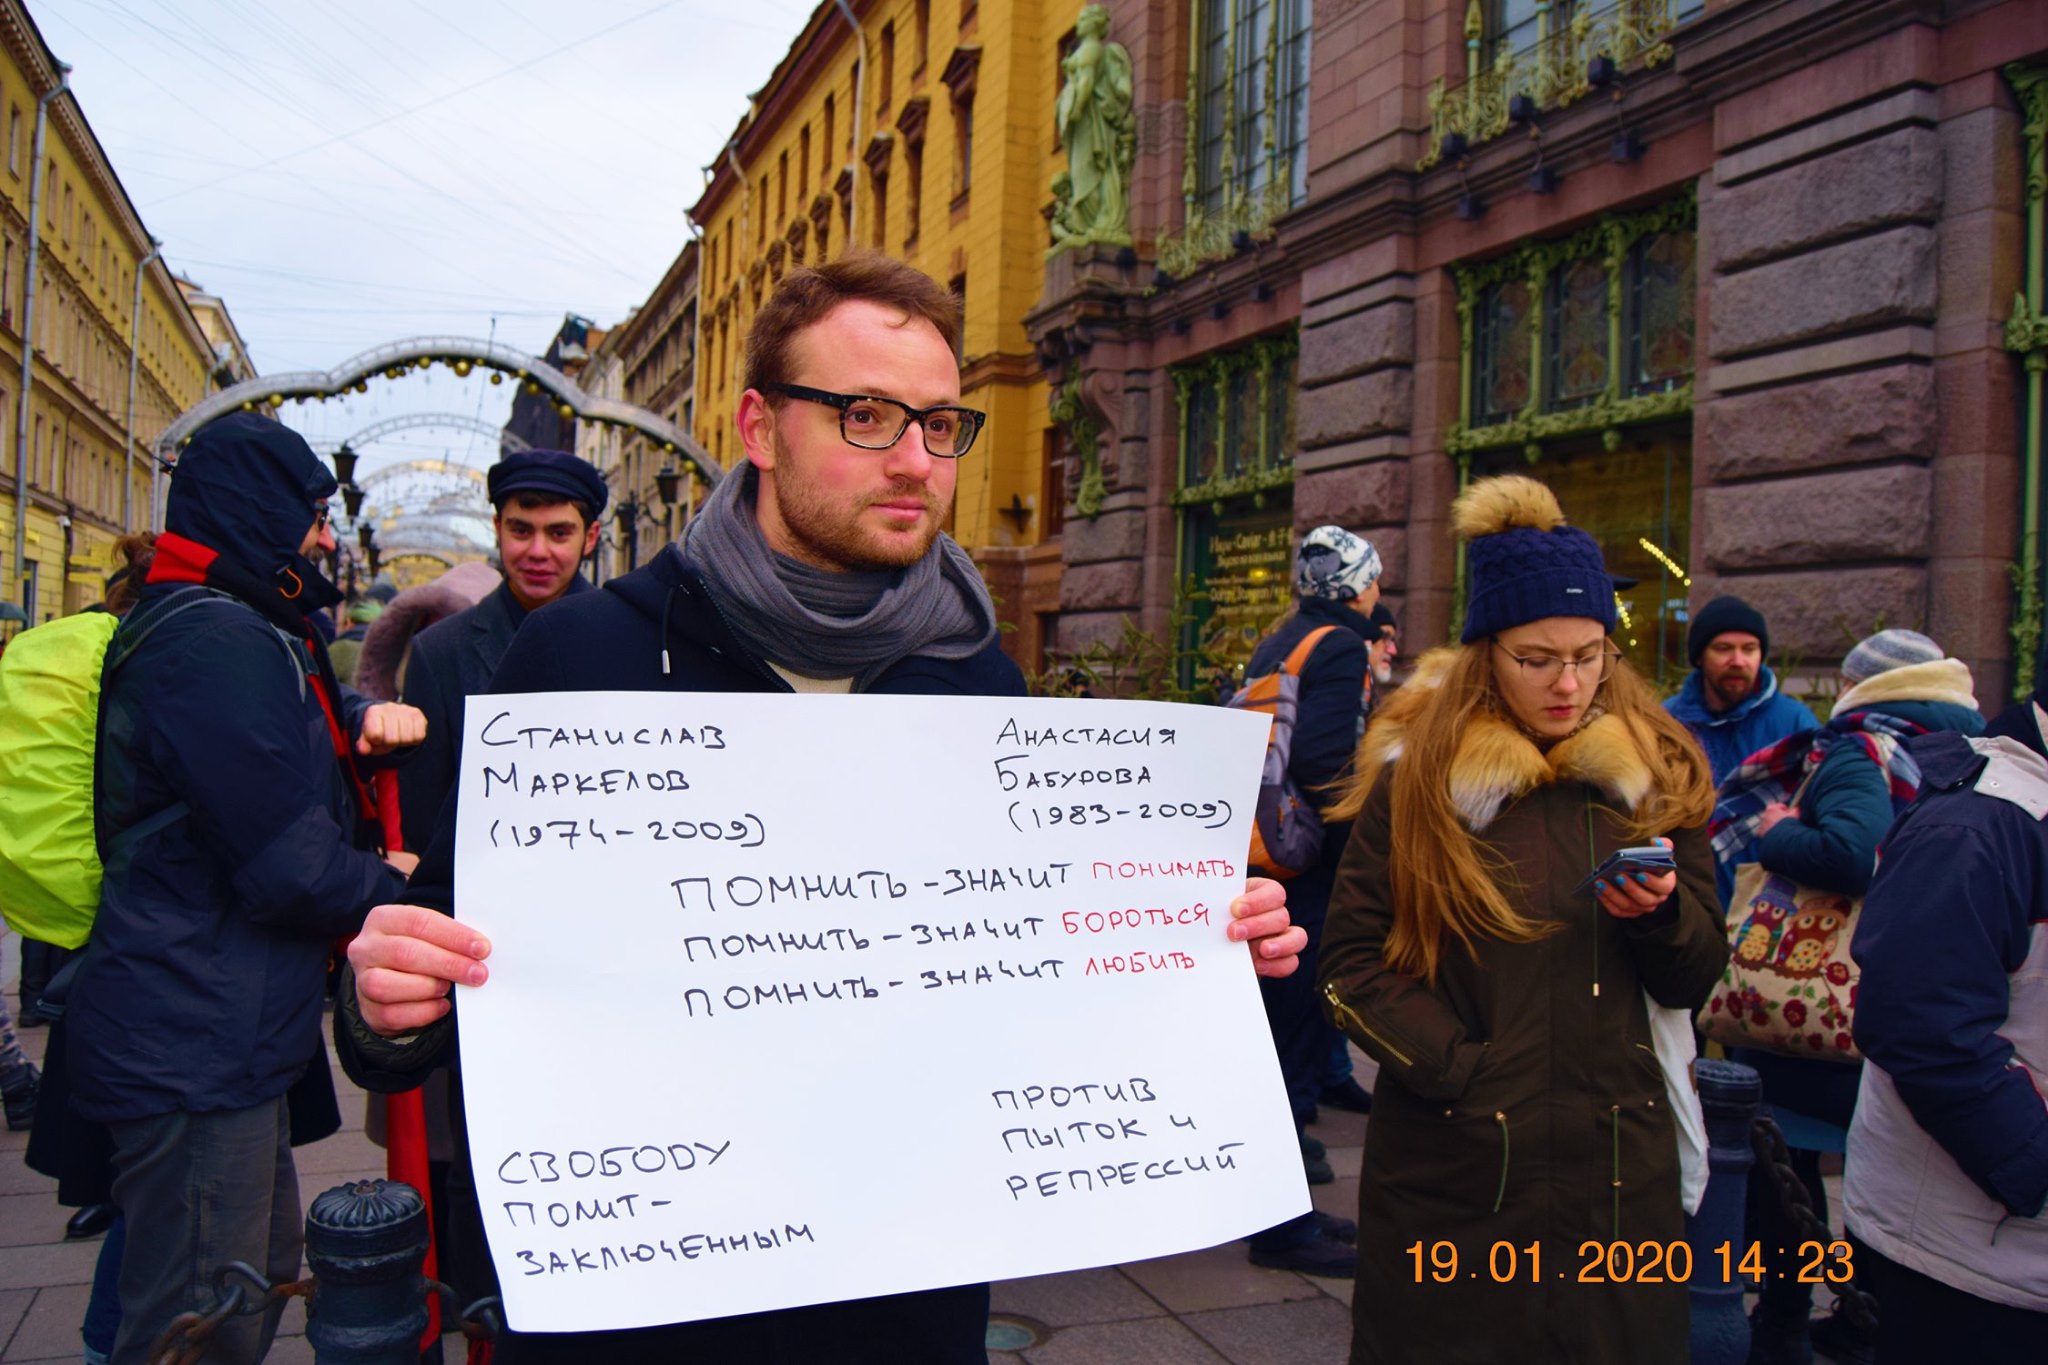 A person with glasses and a scarf hold a white cardboard sign with Russian writing